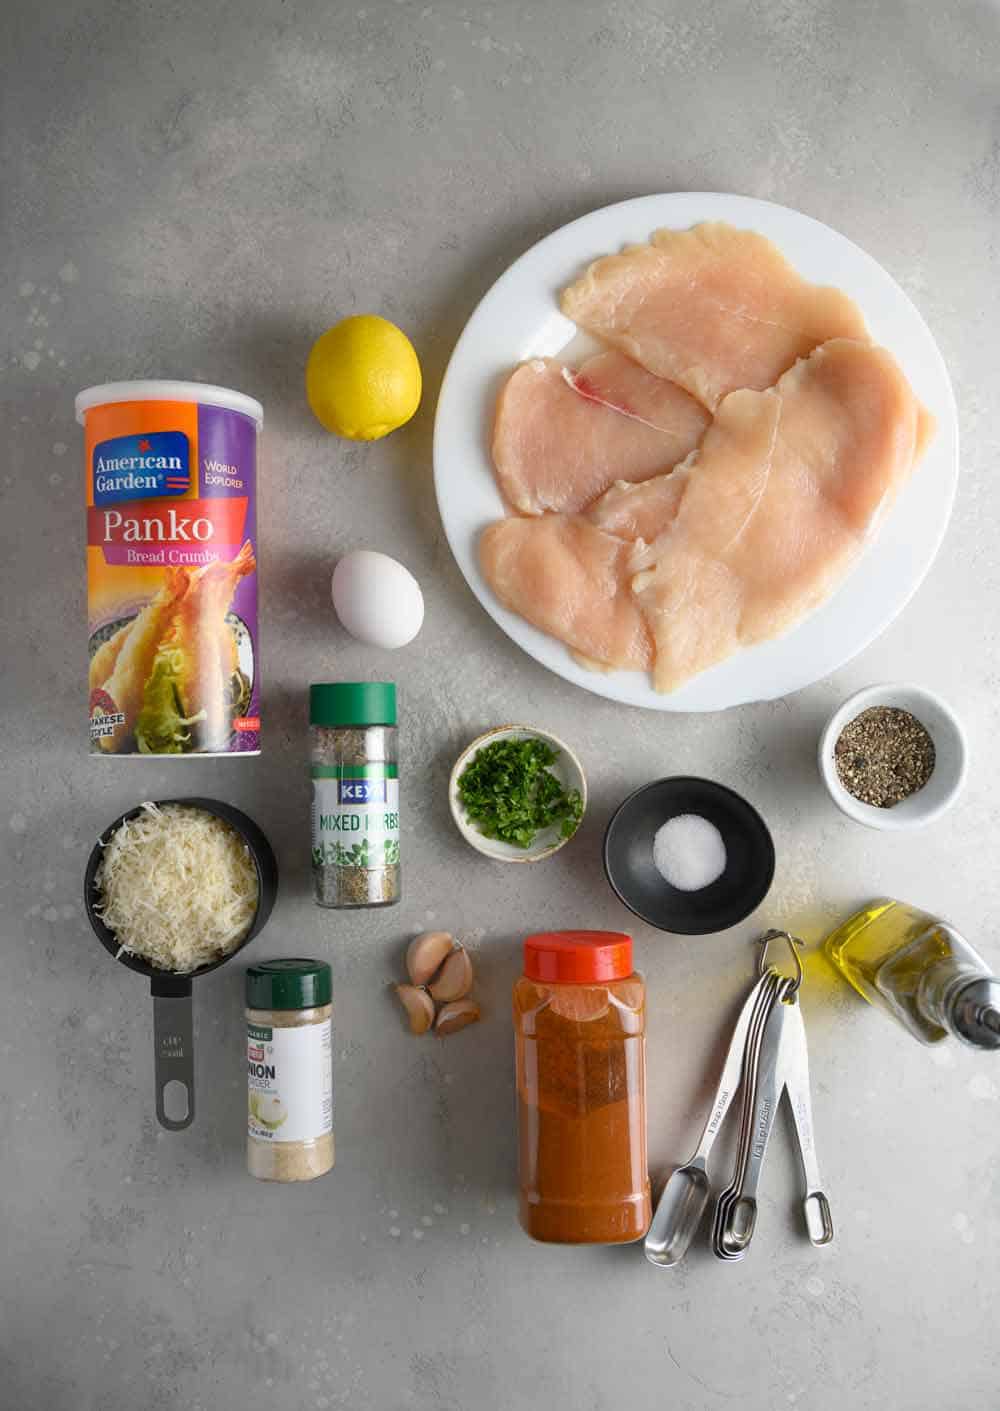 How To Make Skinless Chicken Breast Crispy?